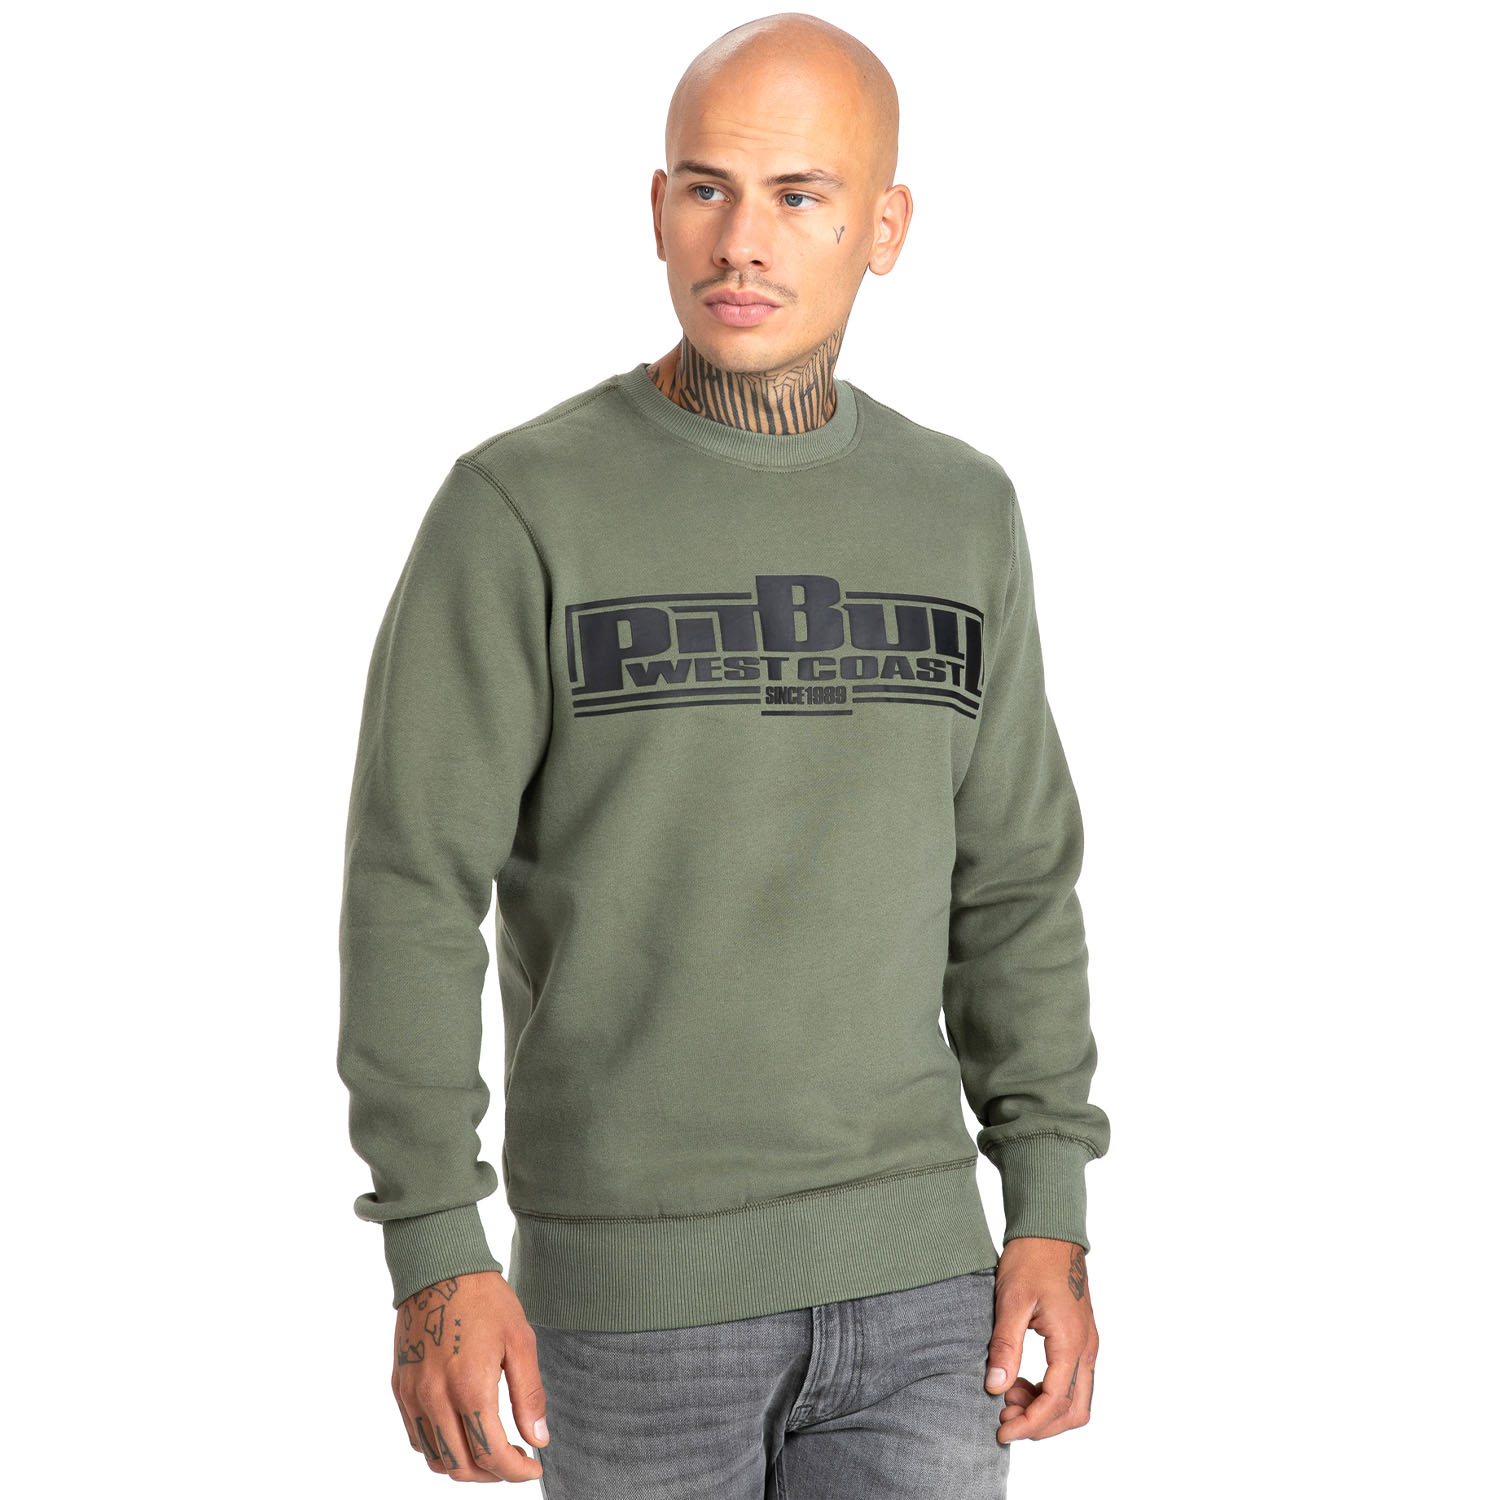 Pit Bull West Coast Pullover, Classic Boxing 21, olive